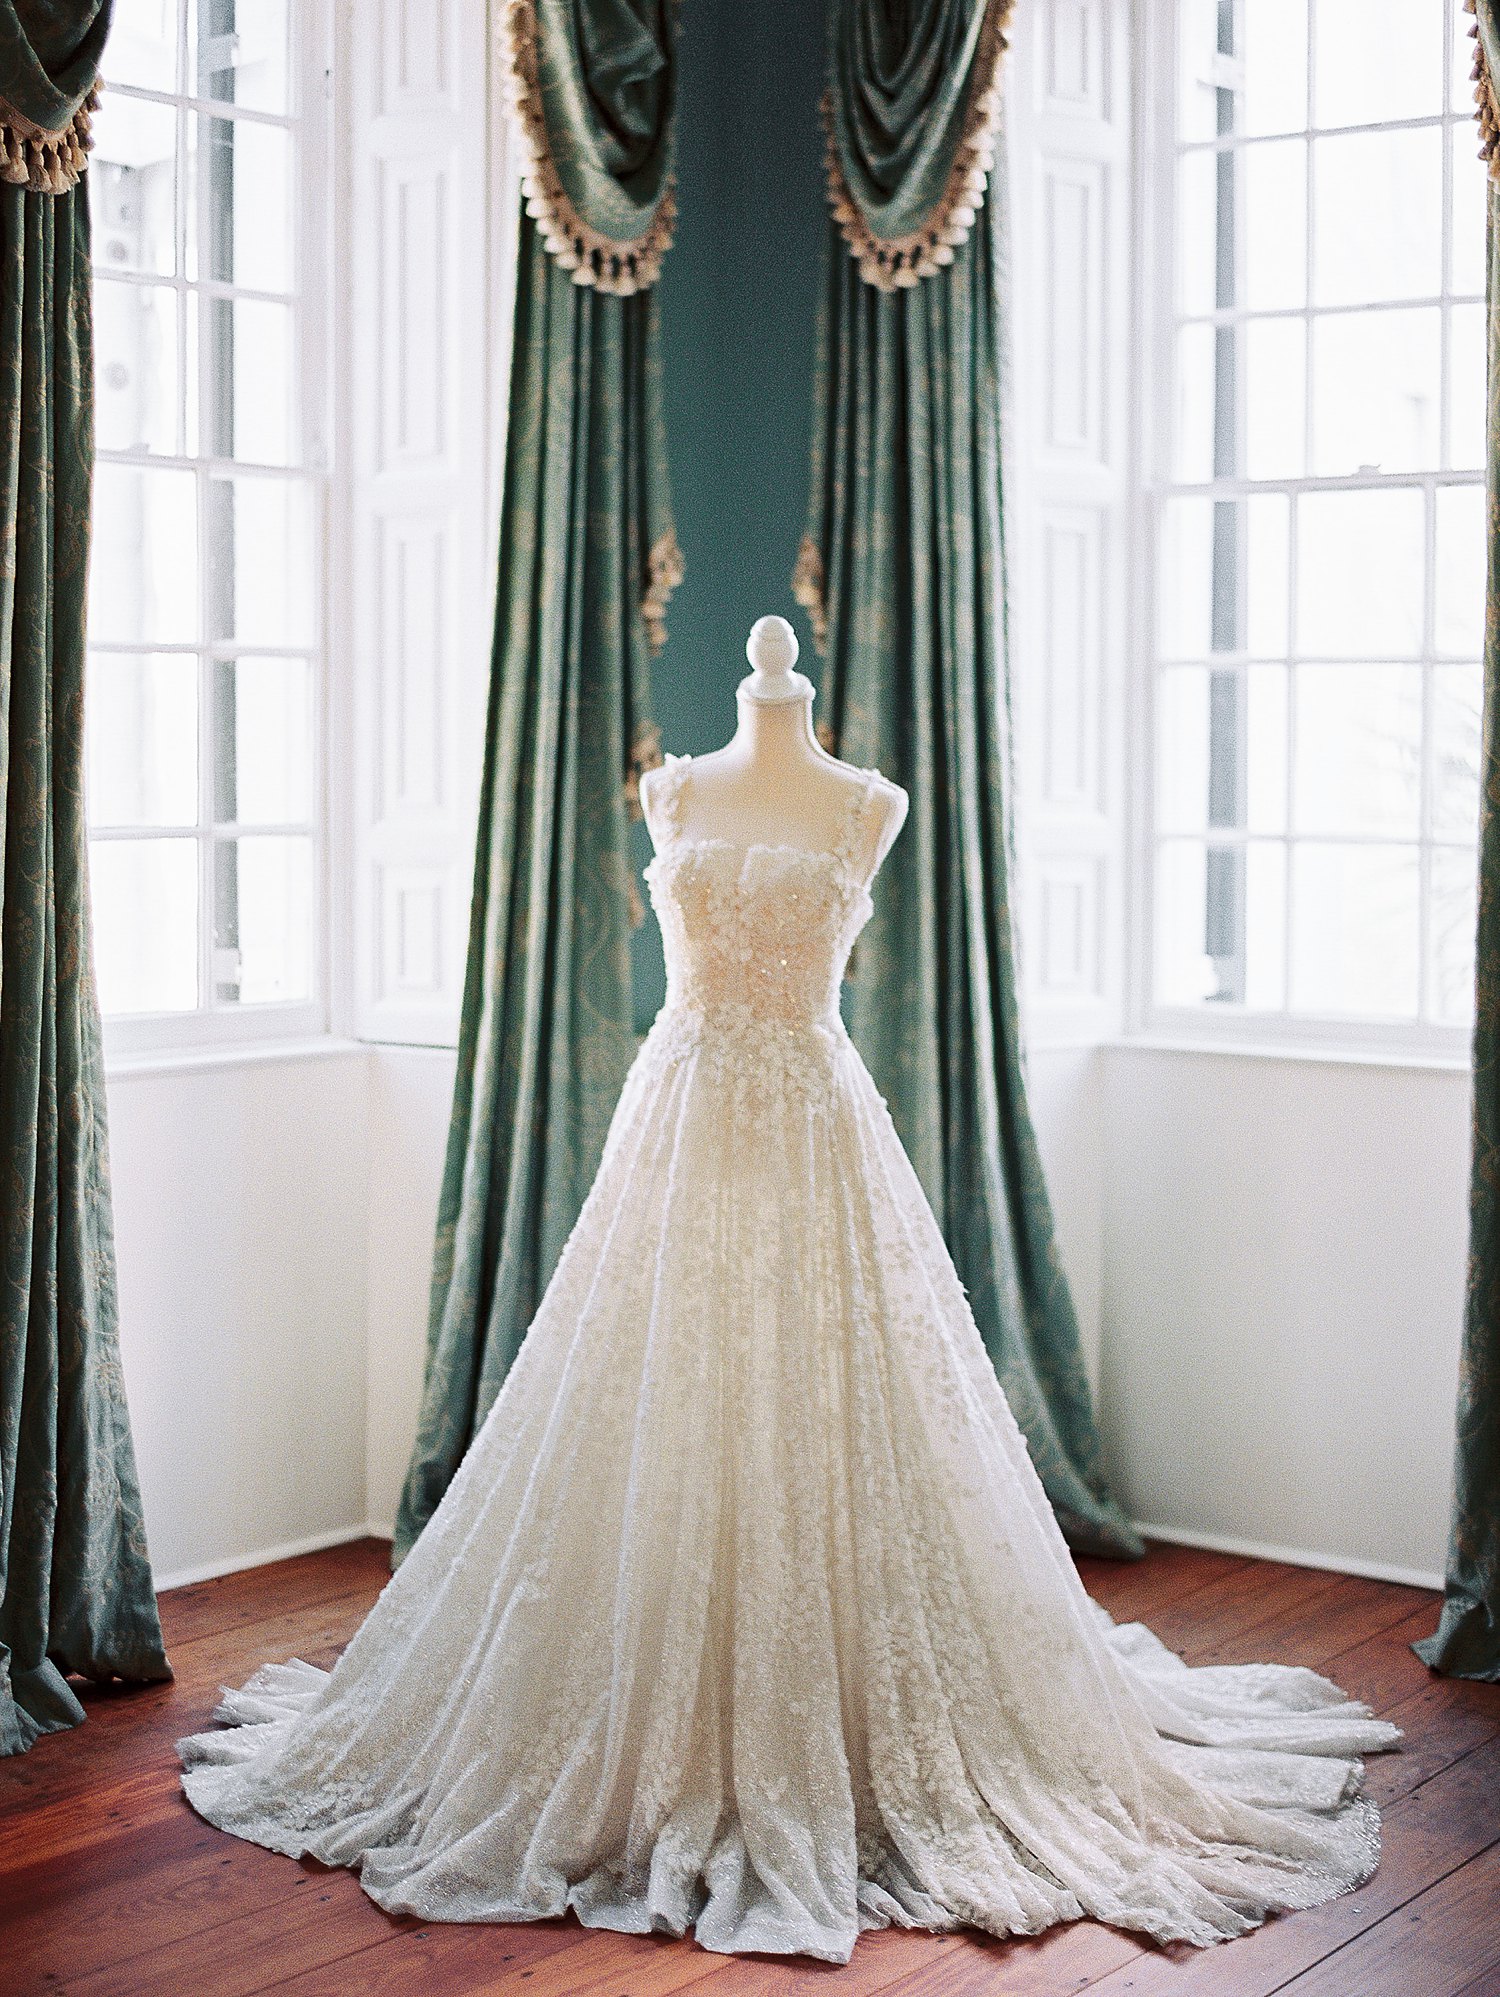 white wedding dress on bust in front of green curtains and windows